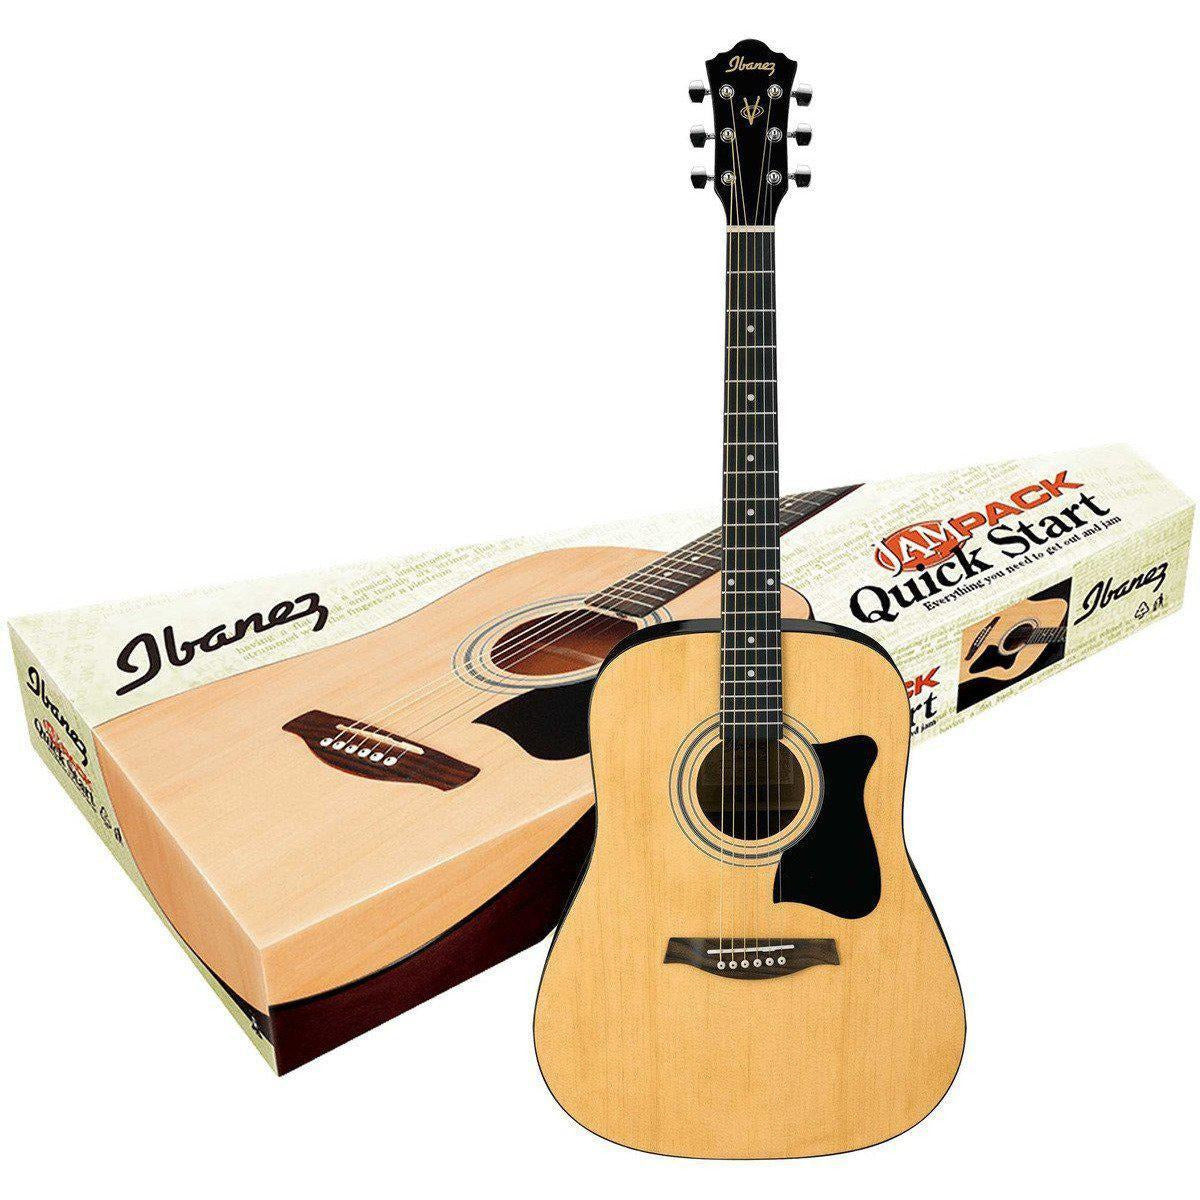 Ibanez IJV50 Acoustic Guitar Pack-Andy's Music